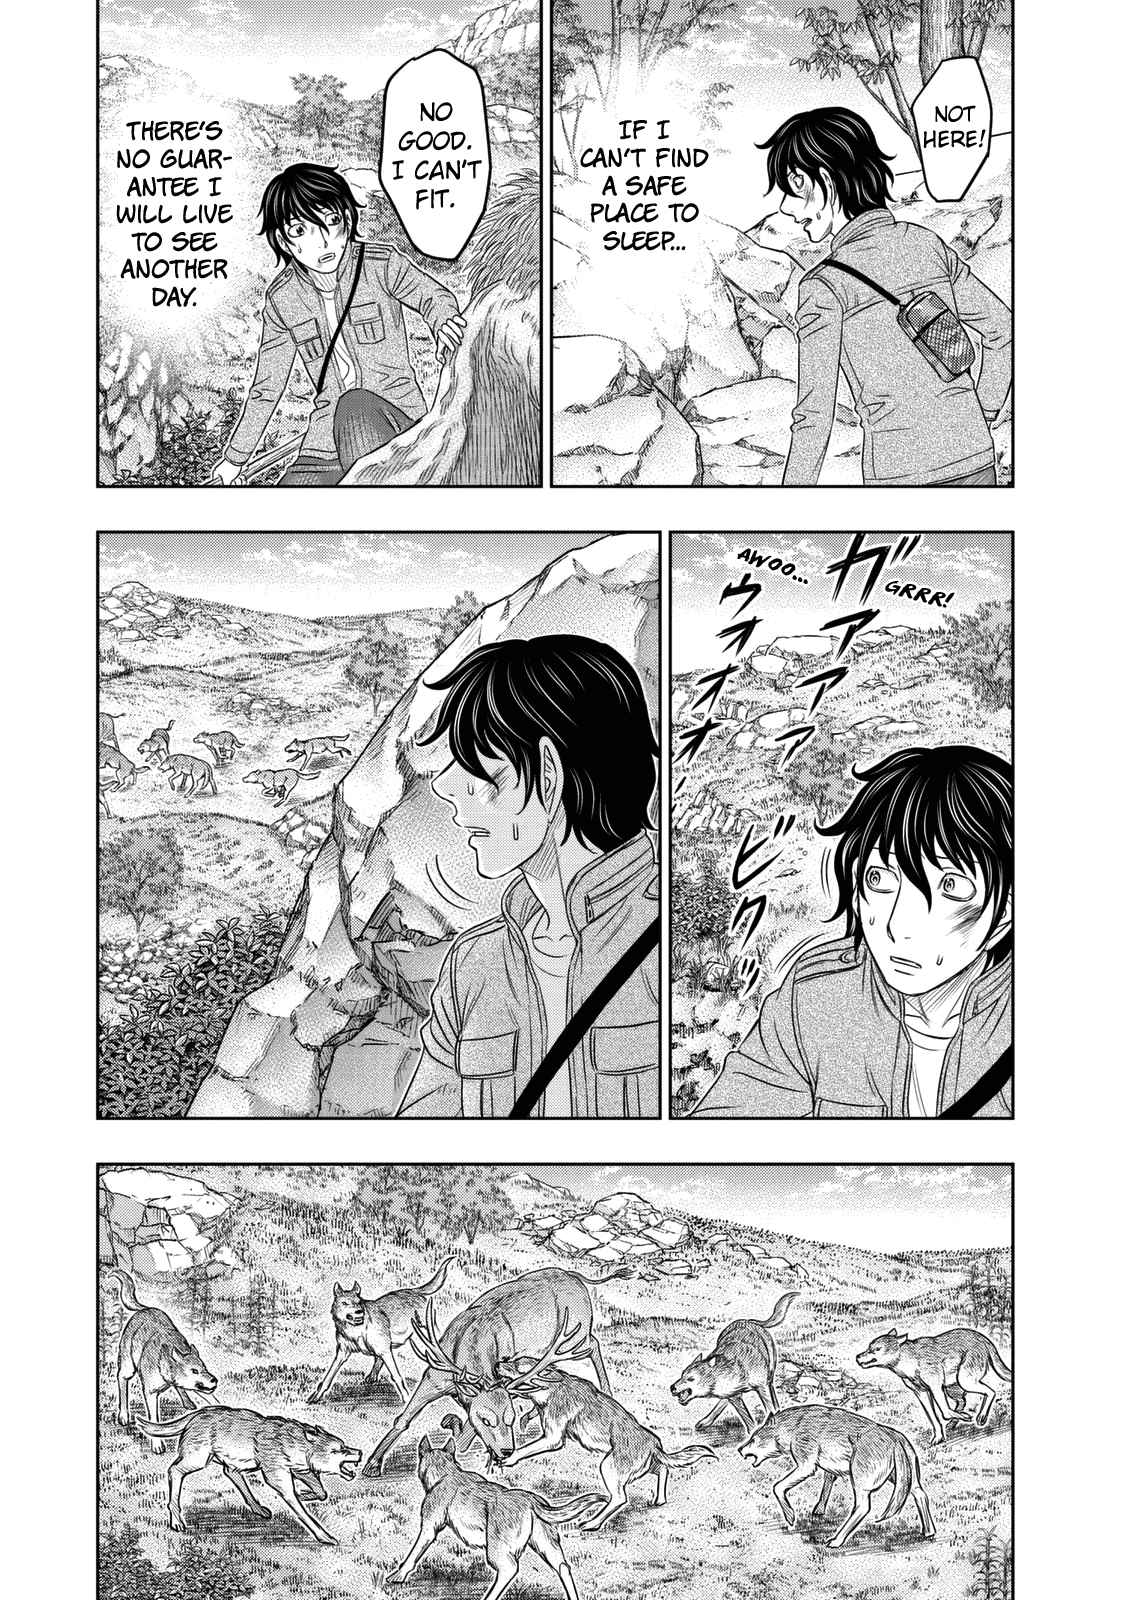 Sousei no Taiga Vol. 2 Ch. 17 The Summoned One